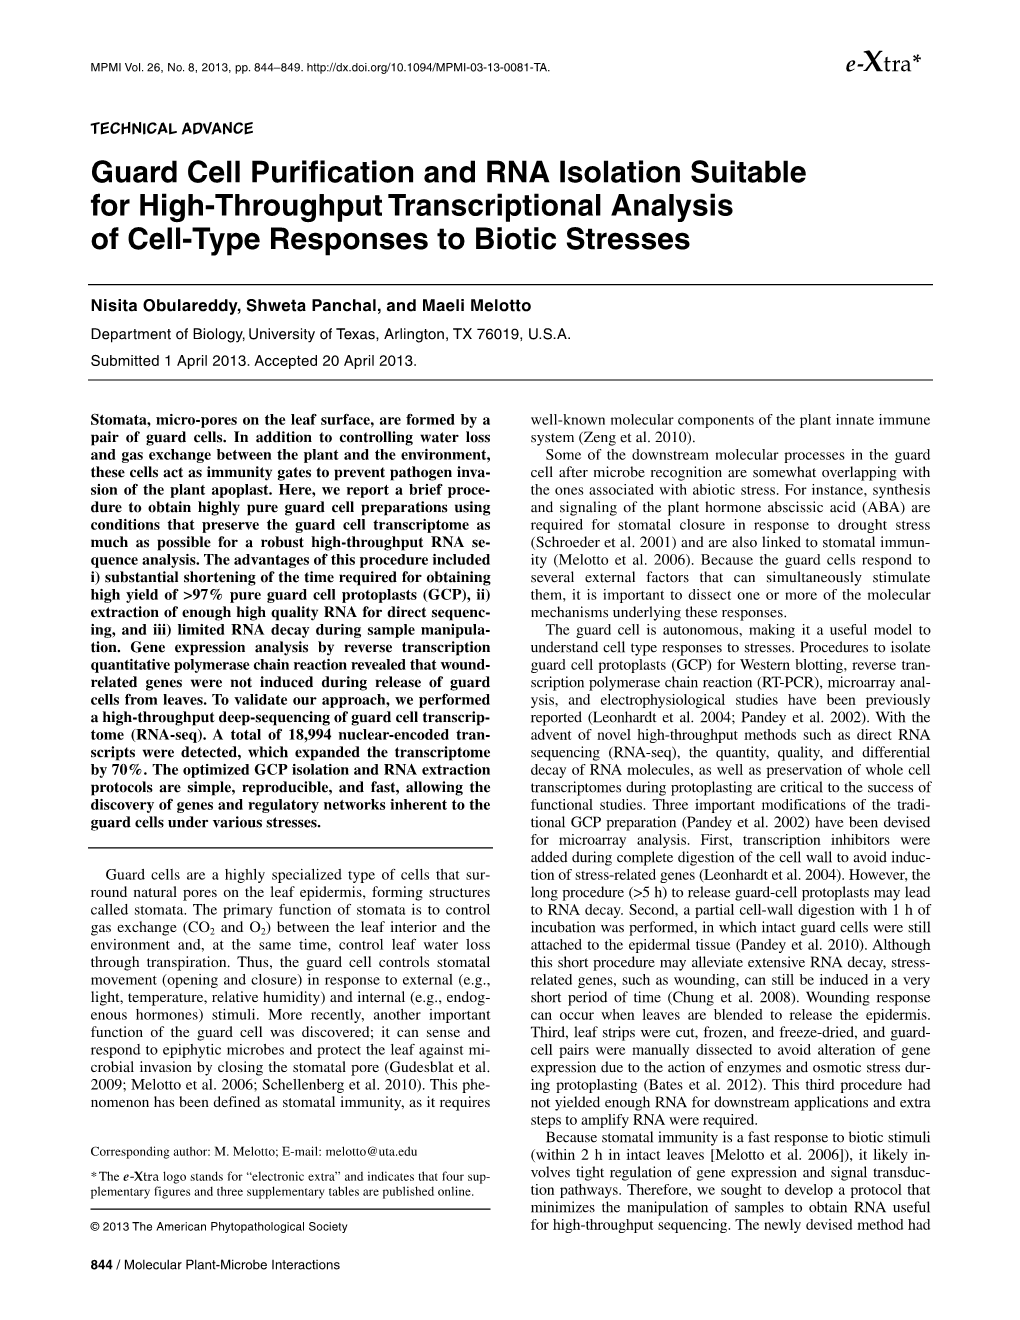 Guard Cell Purification and RNA Isolation Suitable for High-Throughput Transcriptional Analysis of Cell-Type Responses to Biotic Stresses